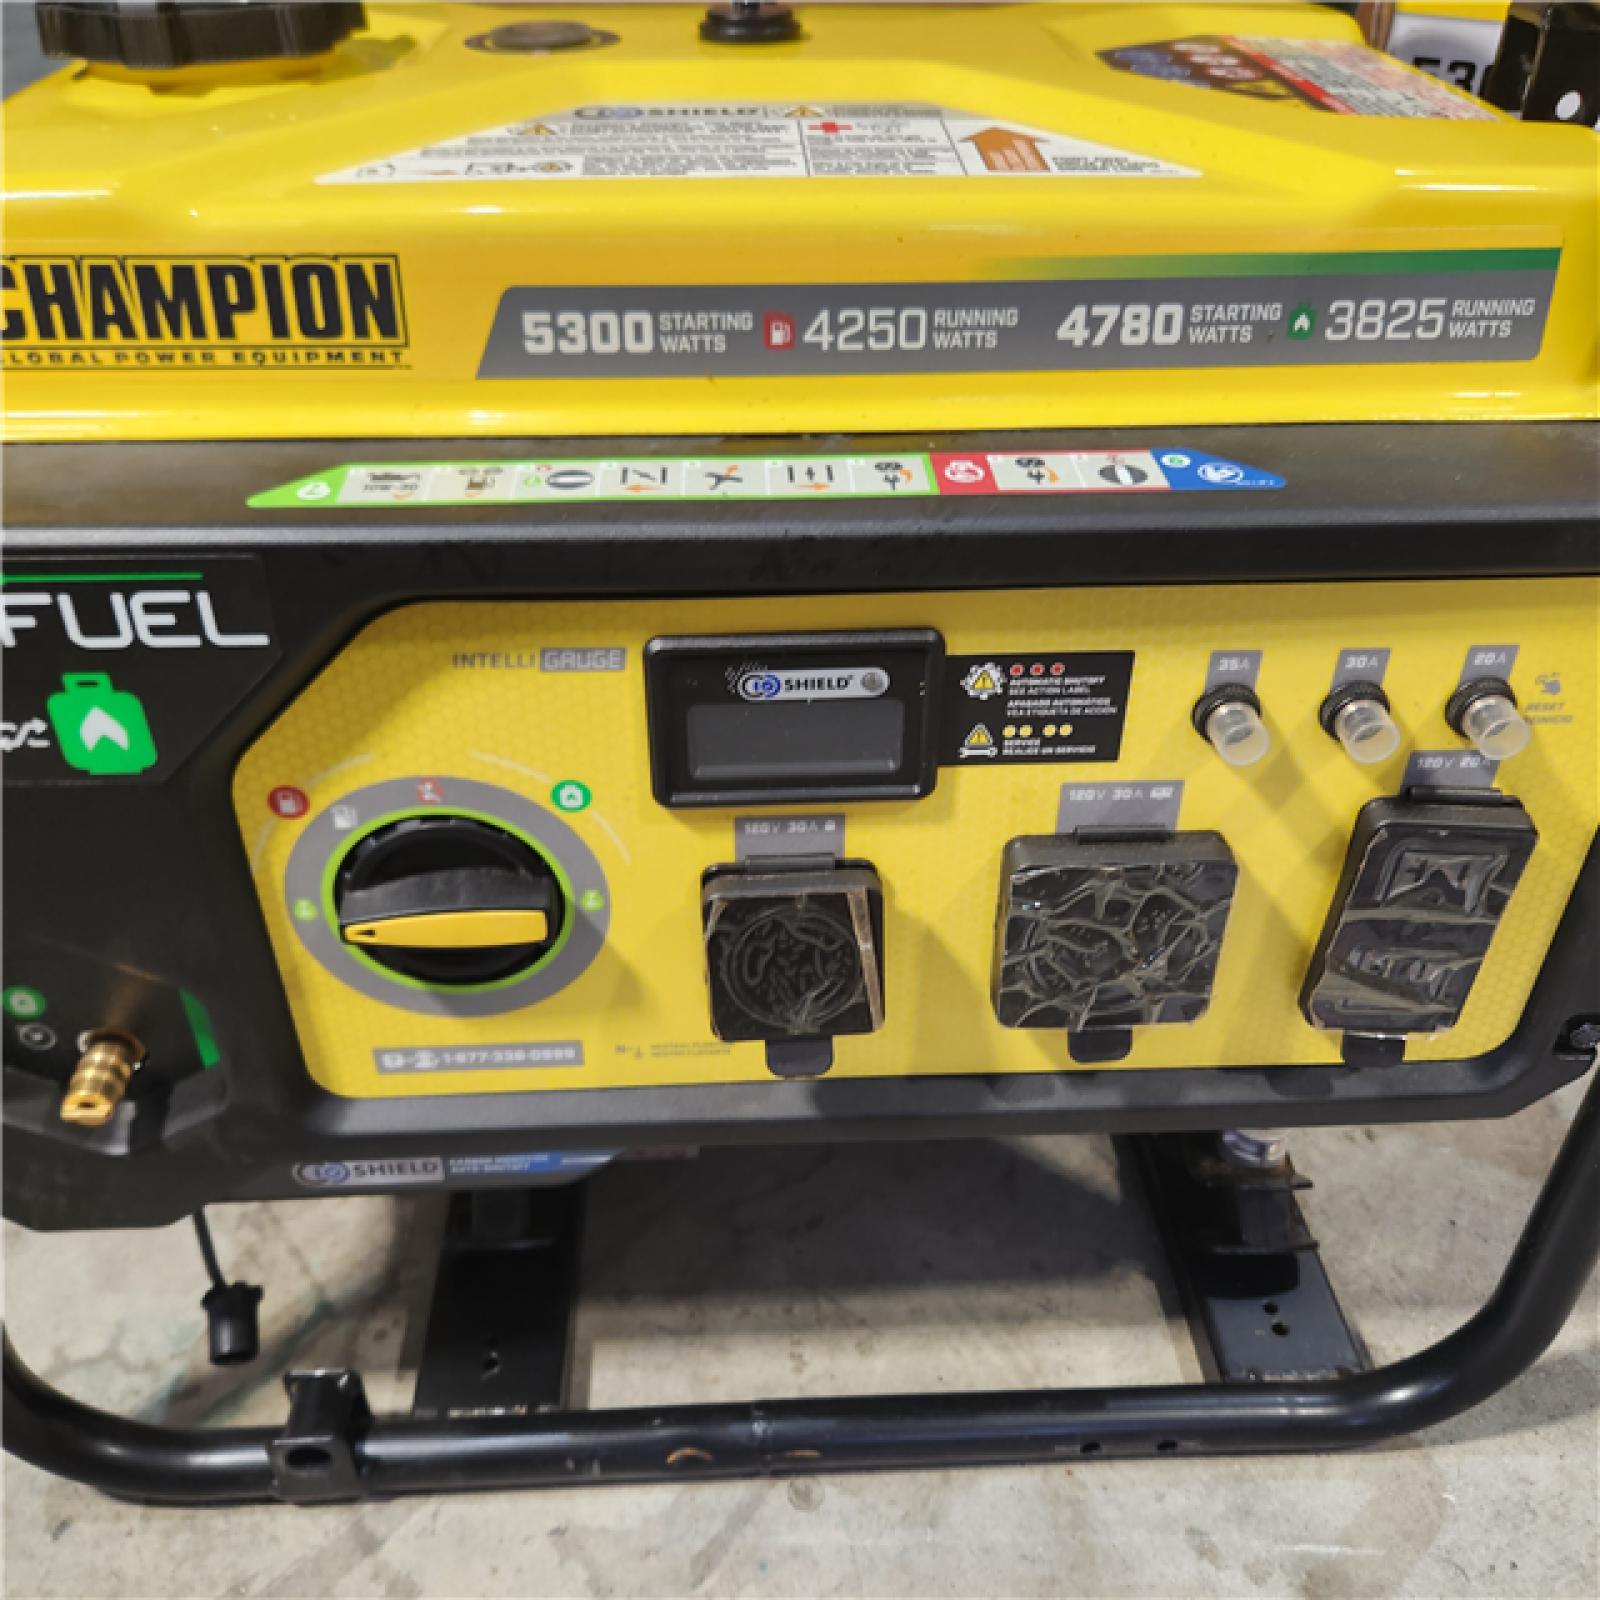 Houston location AS-IS Champion Power Equipment 5300/4250-Watt Recoil Start Gasoline and Propane Dual Fuel Powered Portable Generator with CO Shield - Appears IN LIKE NEW Condition